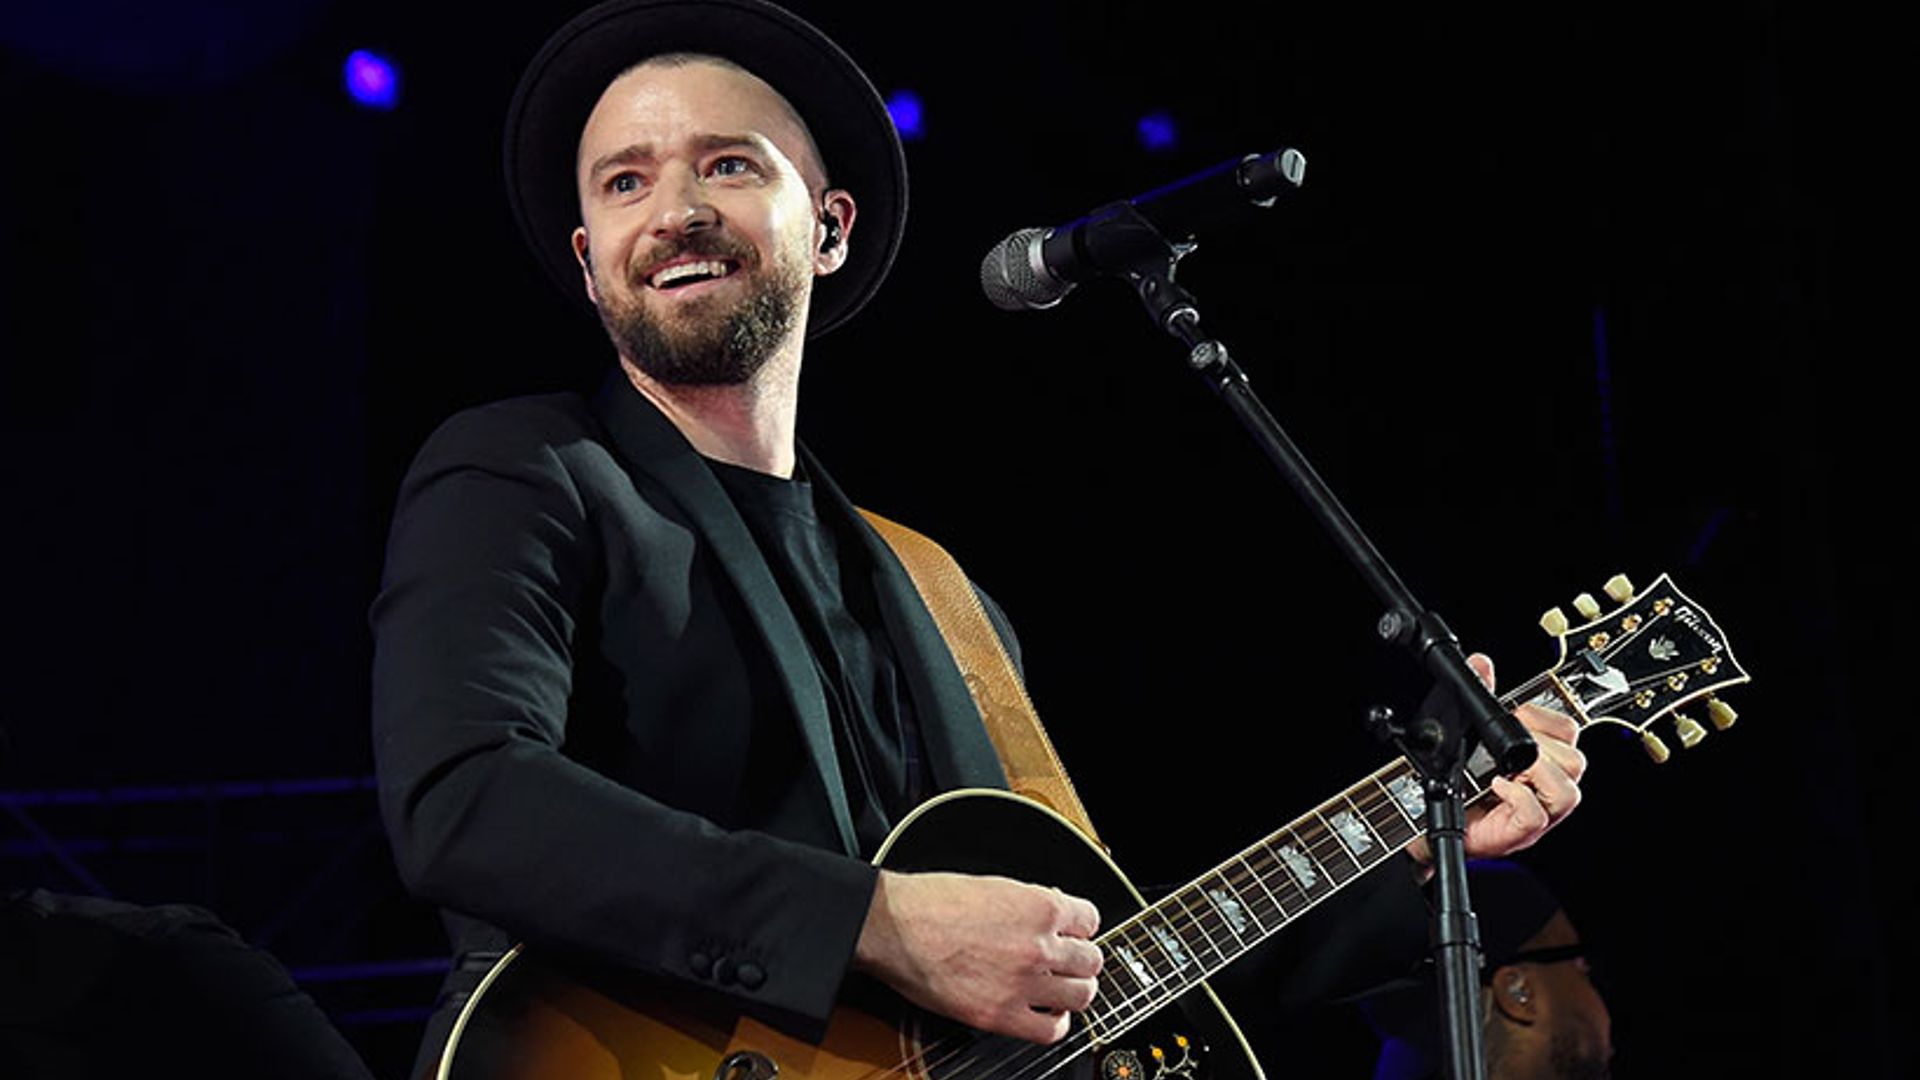 Justin Timberlake to headline the BRIT Awards 15 years after famous Kylie Minogue routine